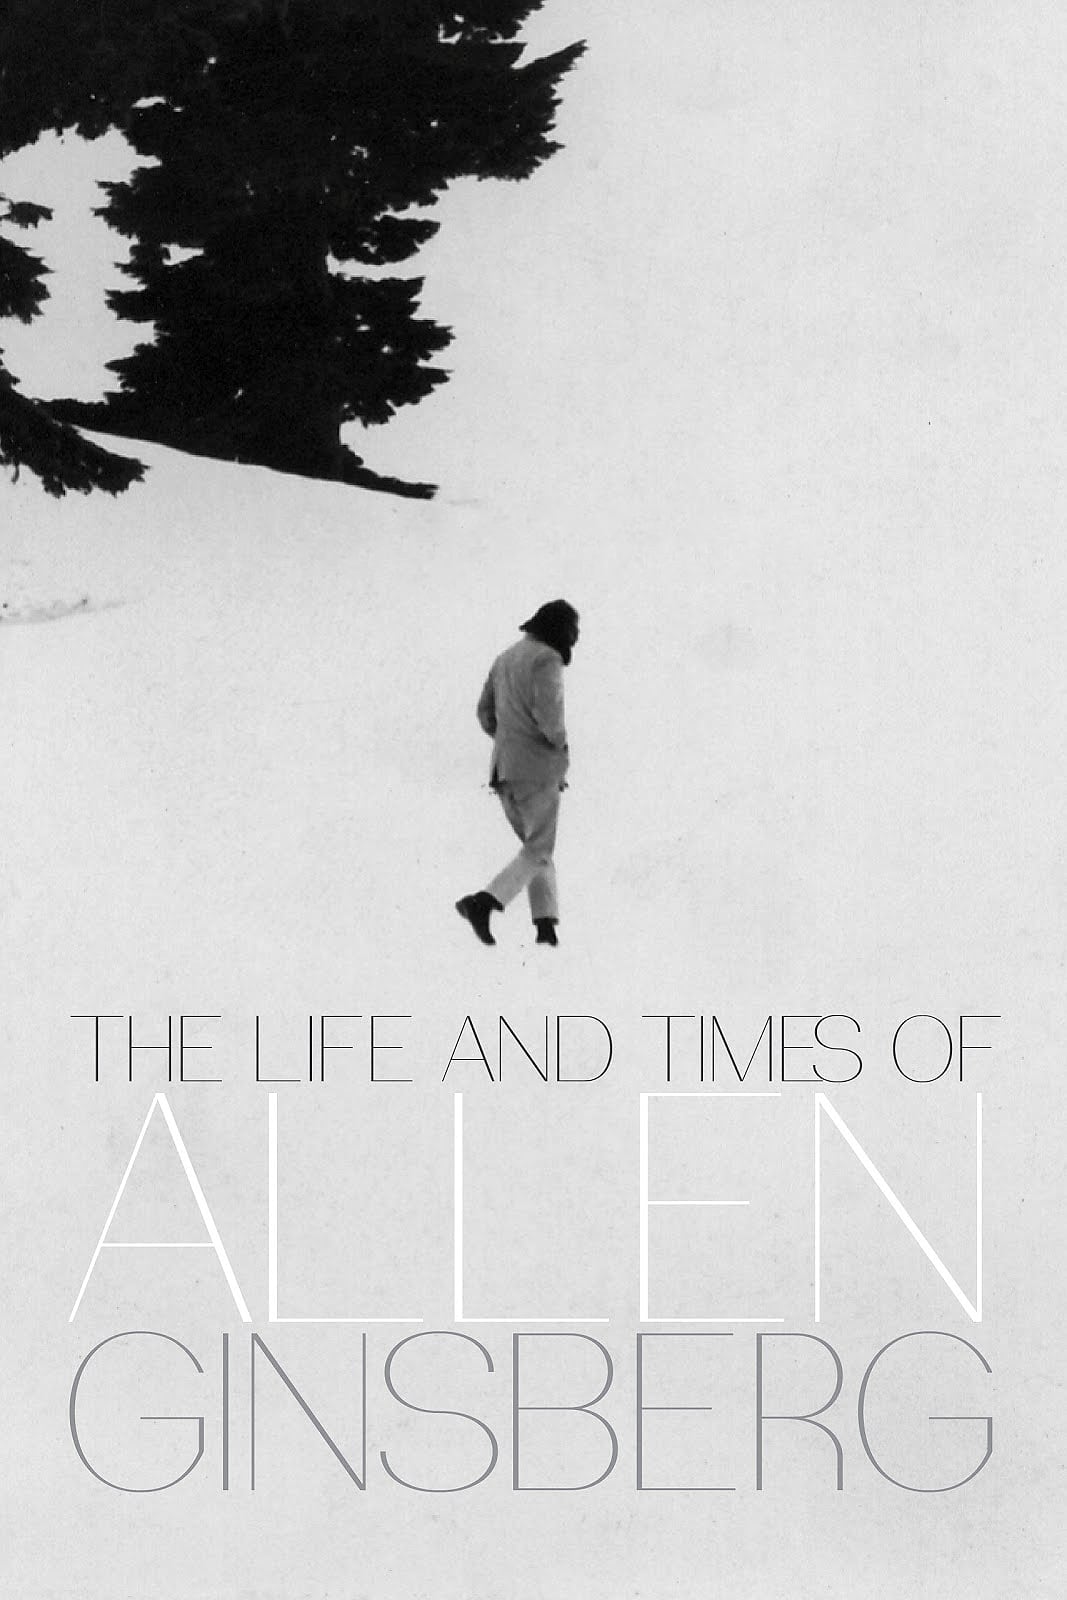 The Life and Times of Allen Ginsberg (2008)